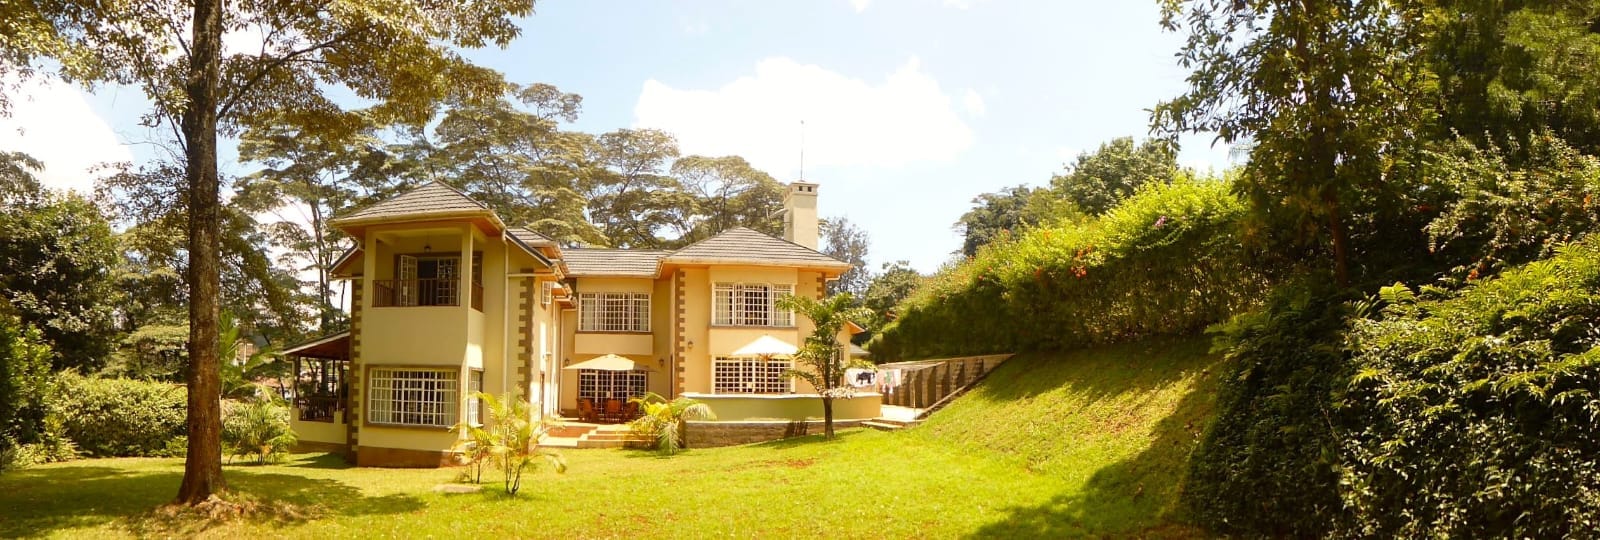 4 Bedroom Mansion For Sale in Kitisuru. Has all the bedroom ensuite, borehole Water Supply, 5KV Inverter with 10 Batteries. Asking: 325M Musilli Homes